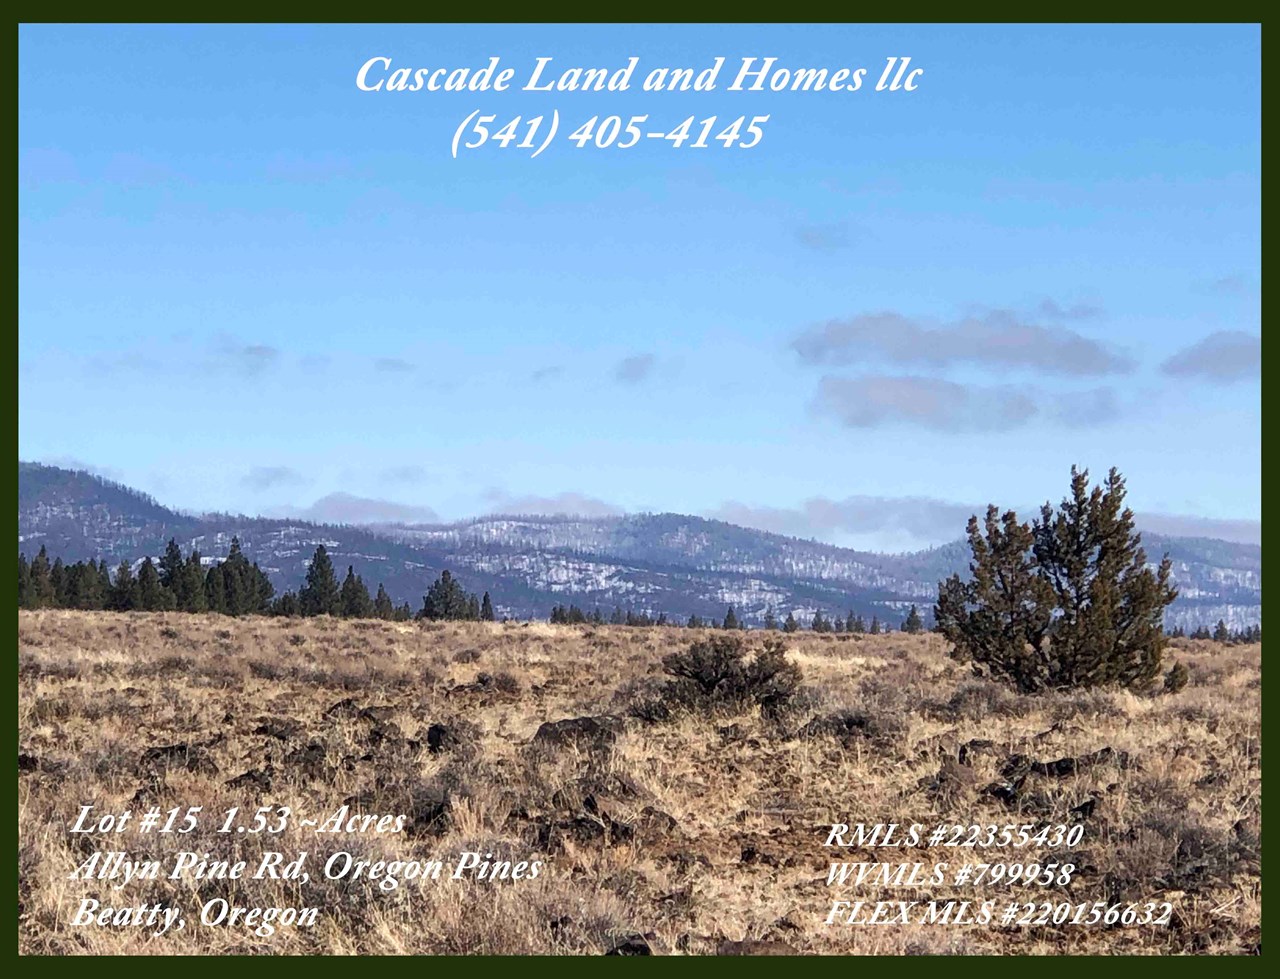 the valleys and foothills that surround the property offer gorgeous territorial views. it is so quiet here, no cars, no sirens, just the quiet wilderness and the gentle wind that blows across the high plateau.